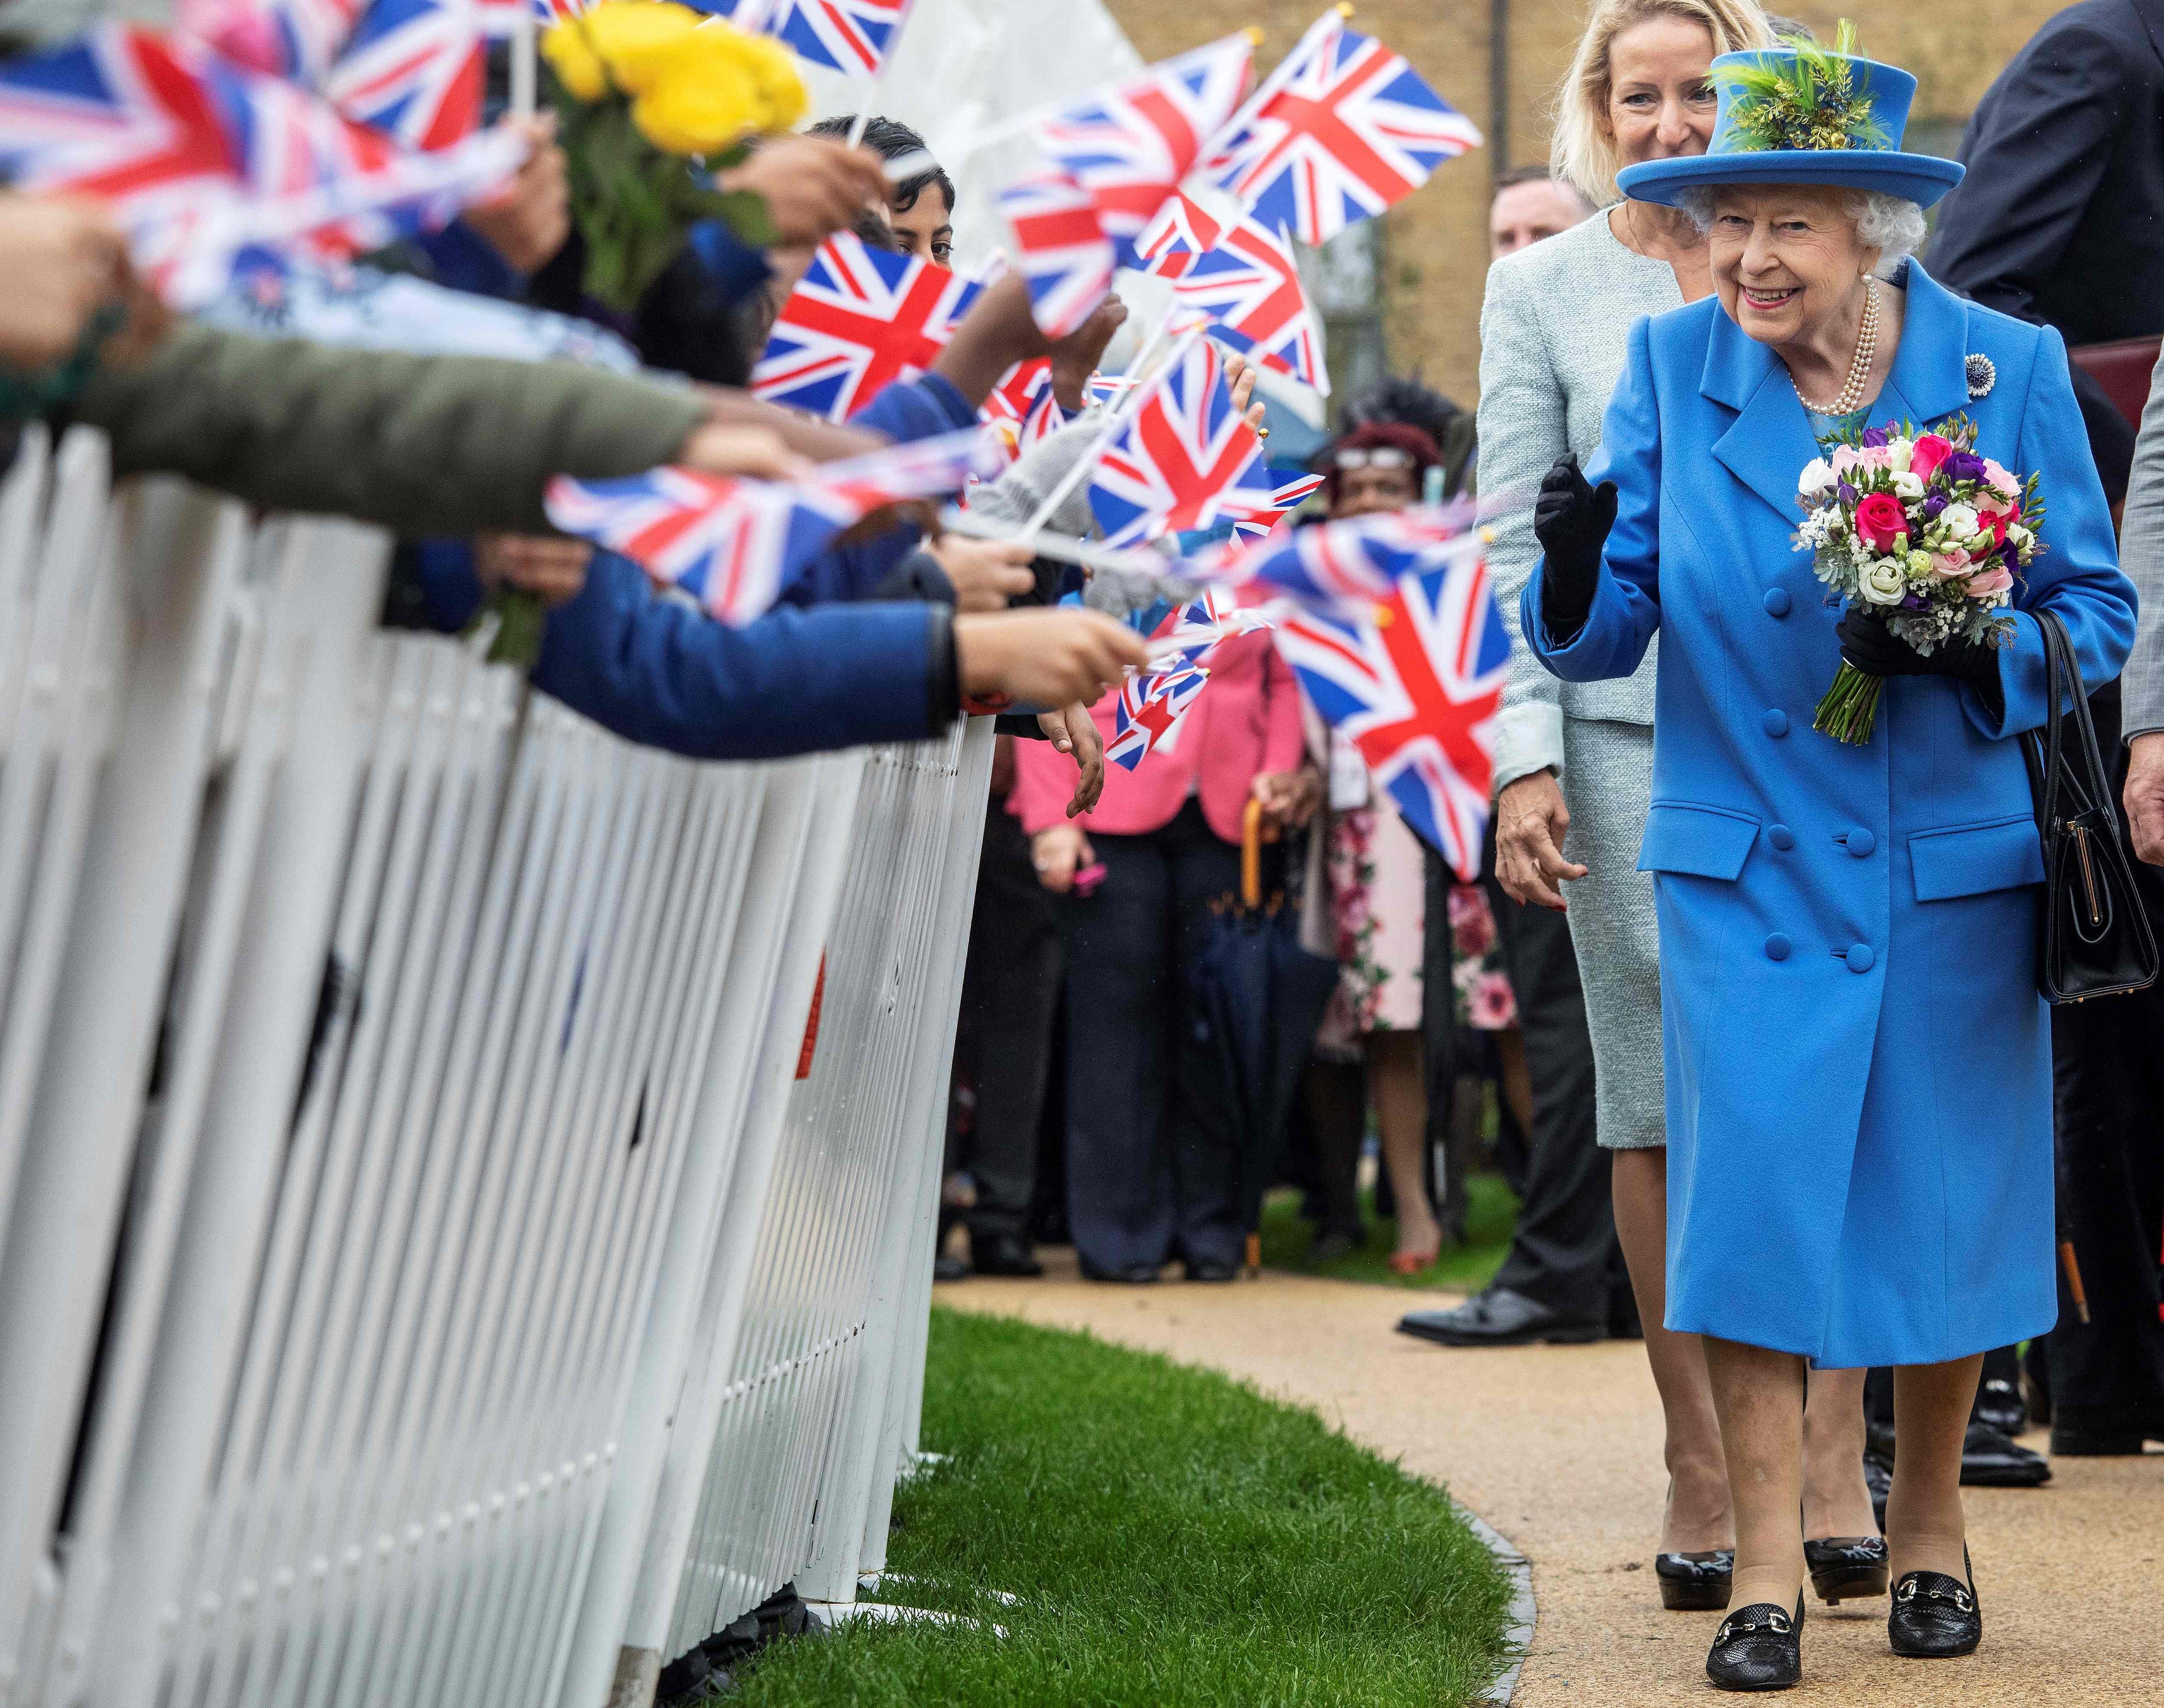 Britain's Queen Elizabeth II reacts as she visits the Haig Housing Trust in Morden, southwest London. (Credit: AFP)